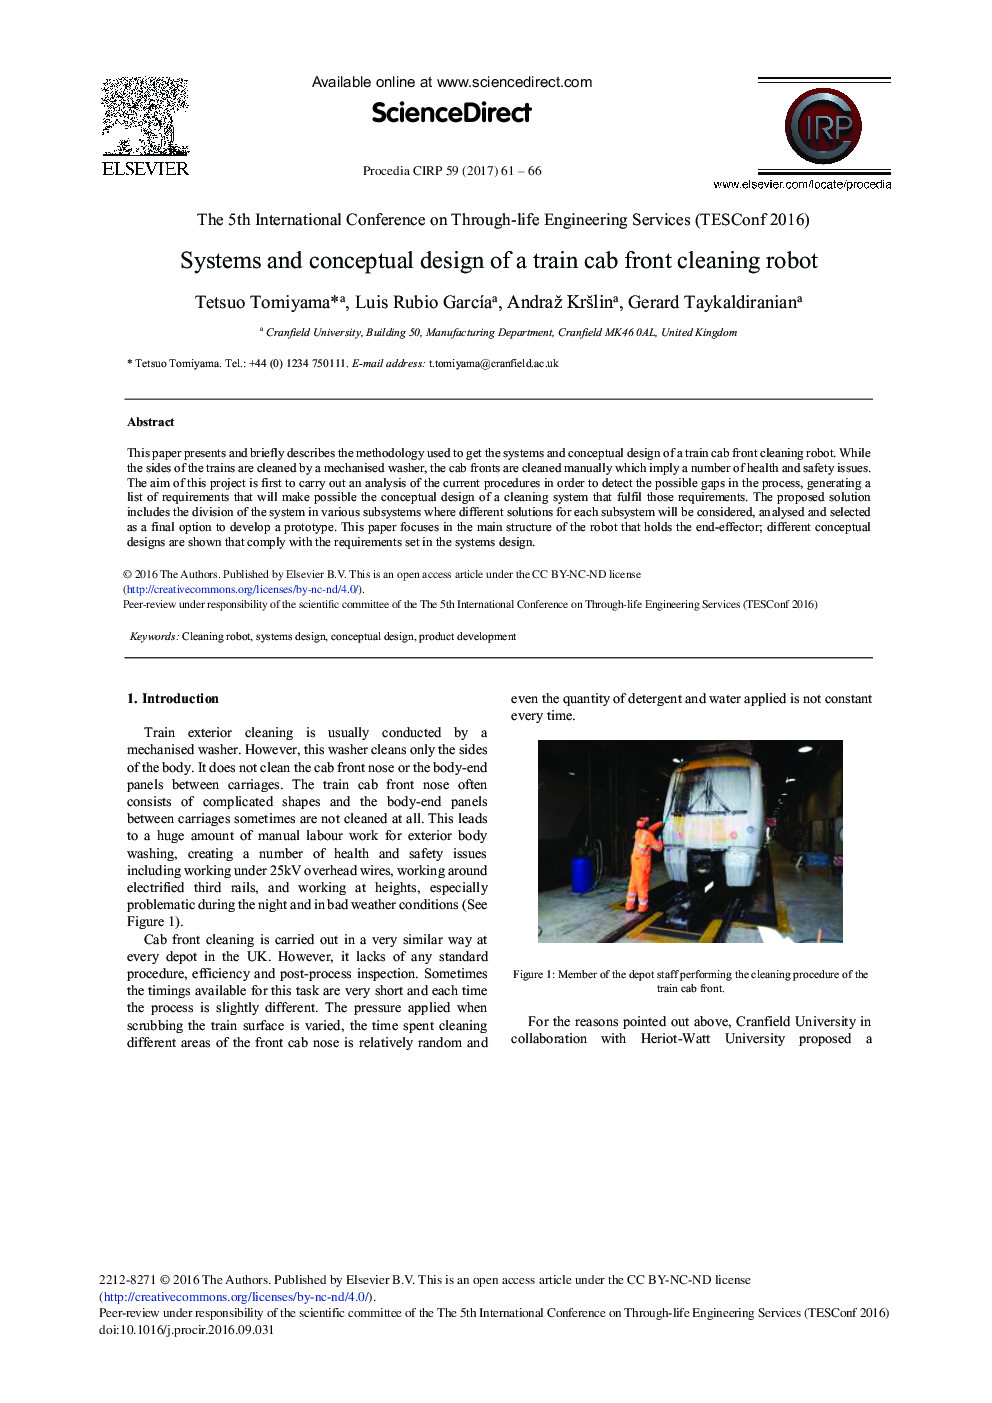 Systems and Conceptual Design of a Train Cab Front Cleaning Robot